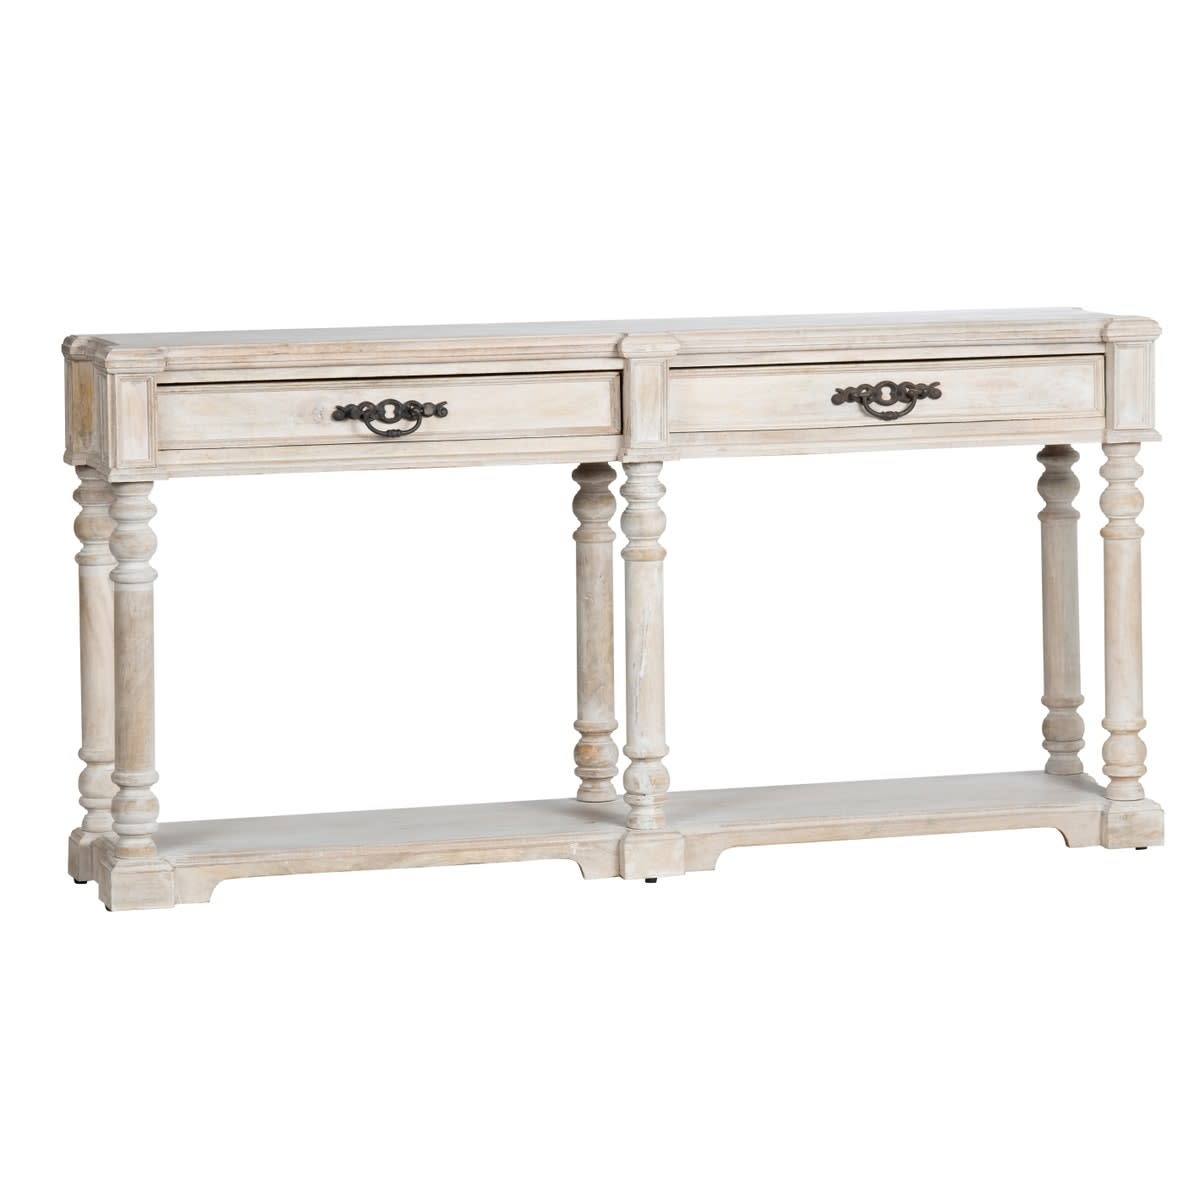 Abbott Console Table 68 x 14 x 34 Furniture Available for Local Delivery or Pick Up